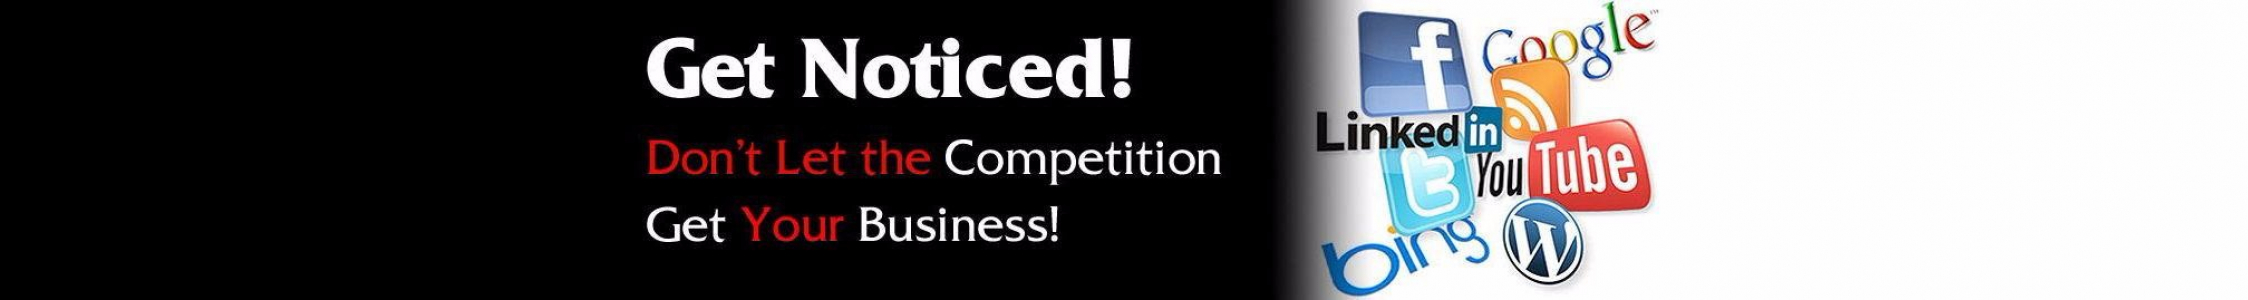 Get Noticed, Don't Let the Competition Get Your Business